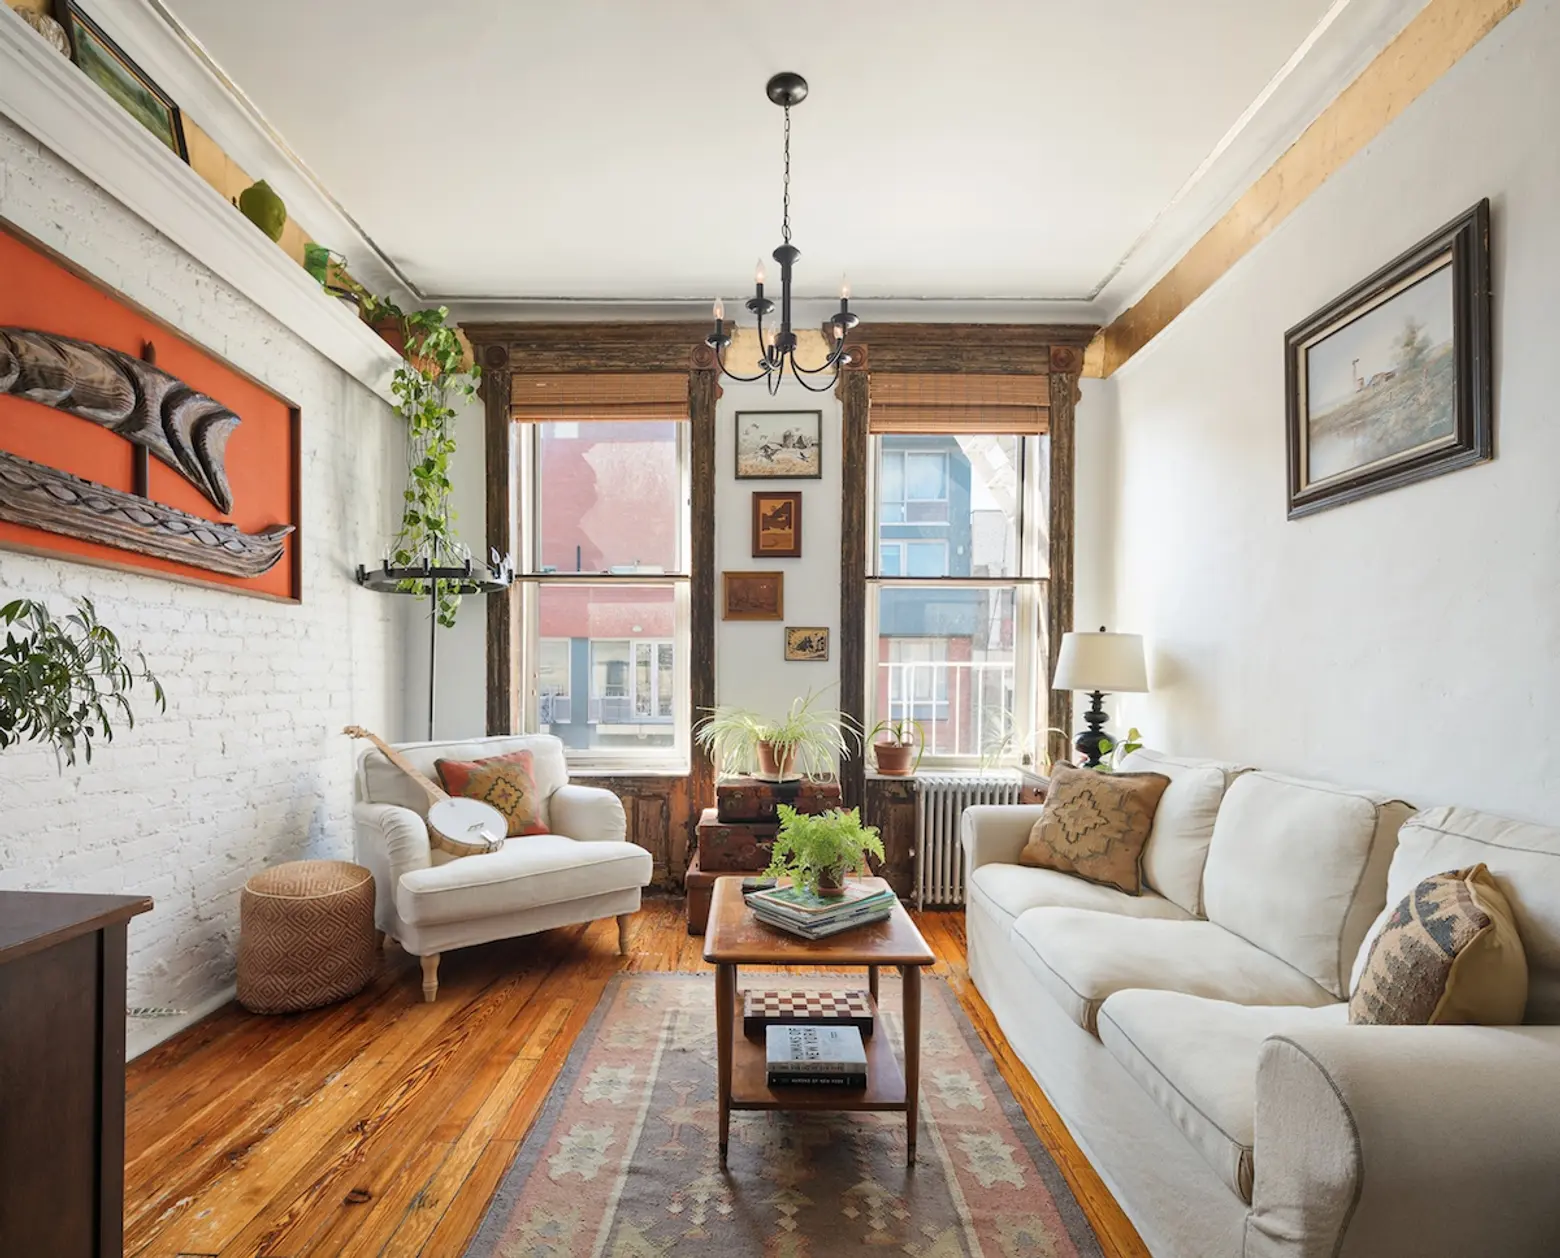 This $499K East Village co-op serves up modern rustic and cozy chic